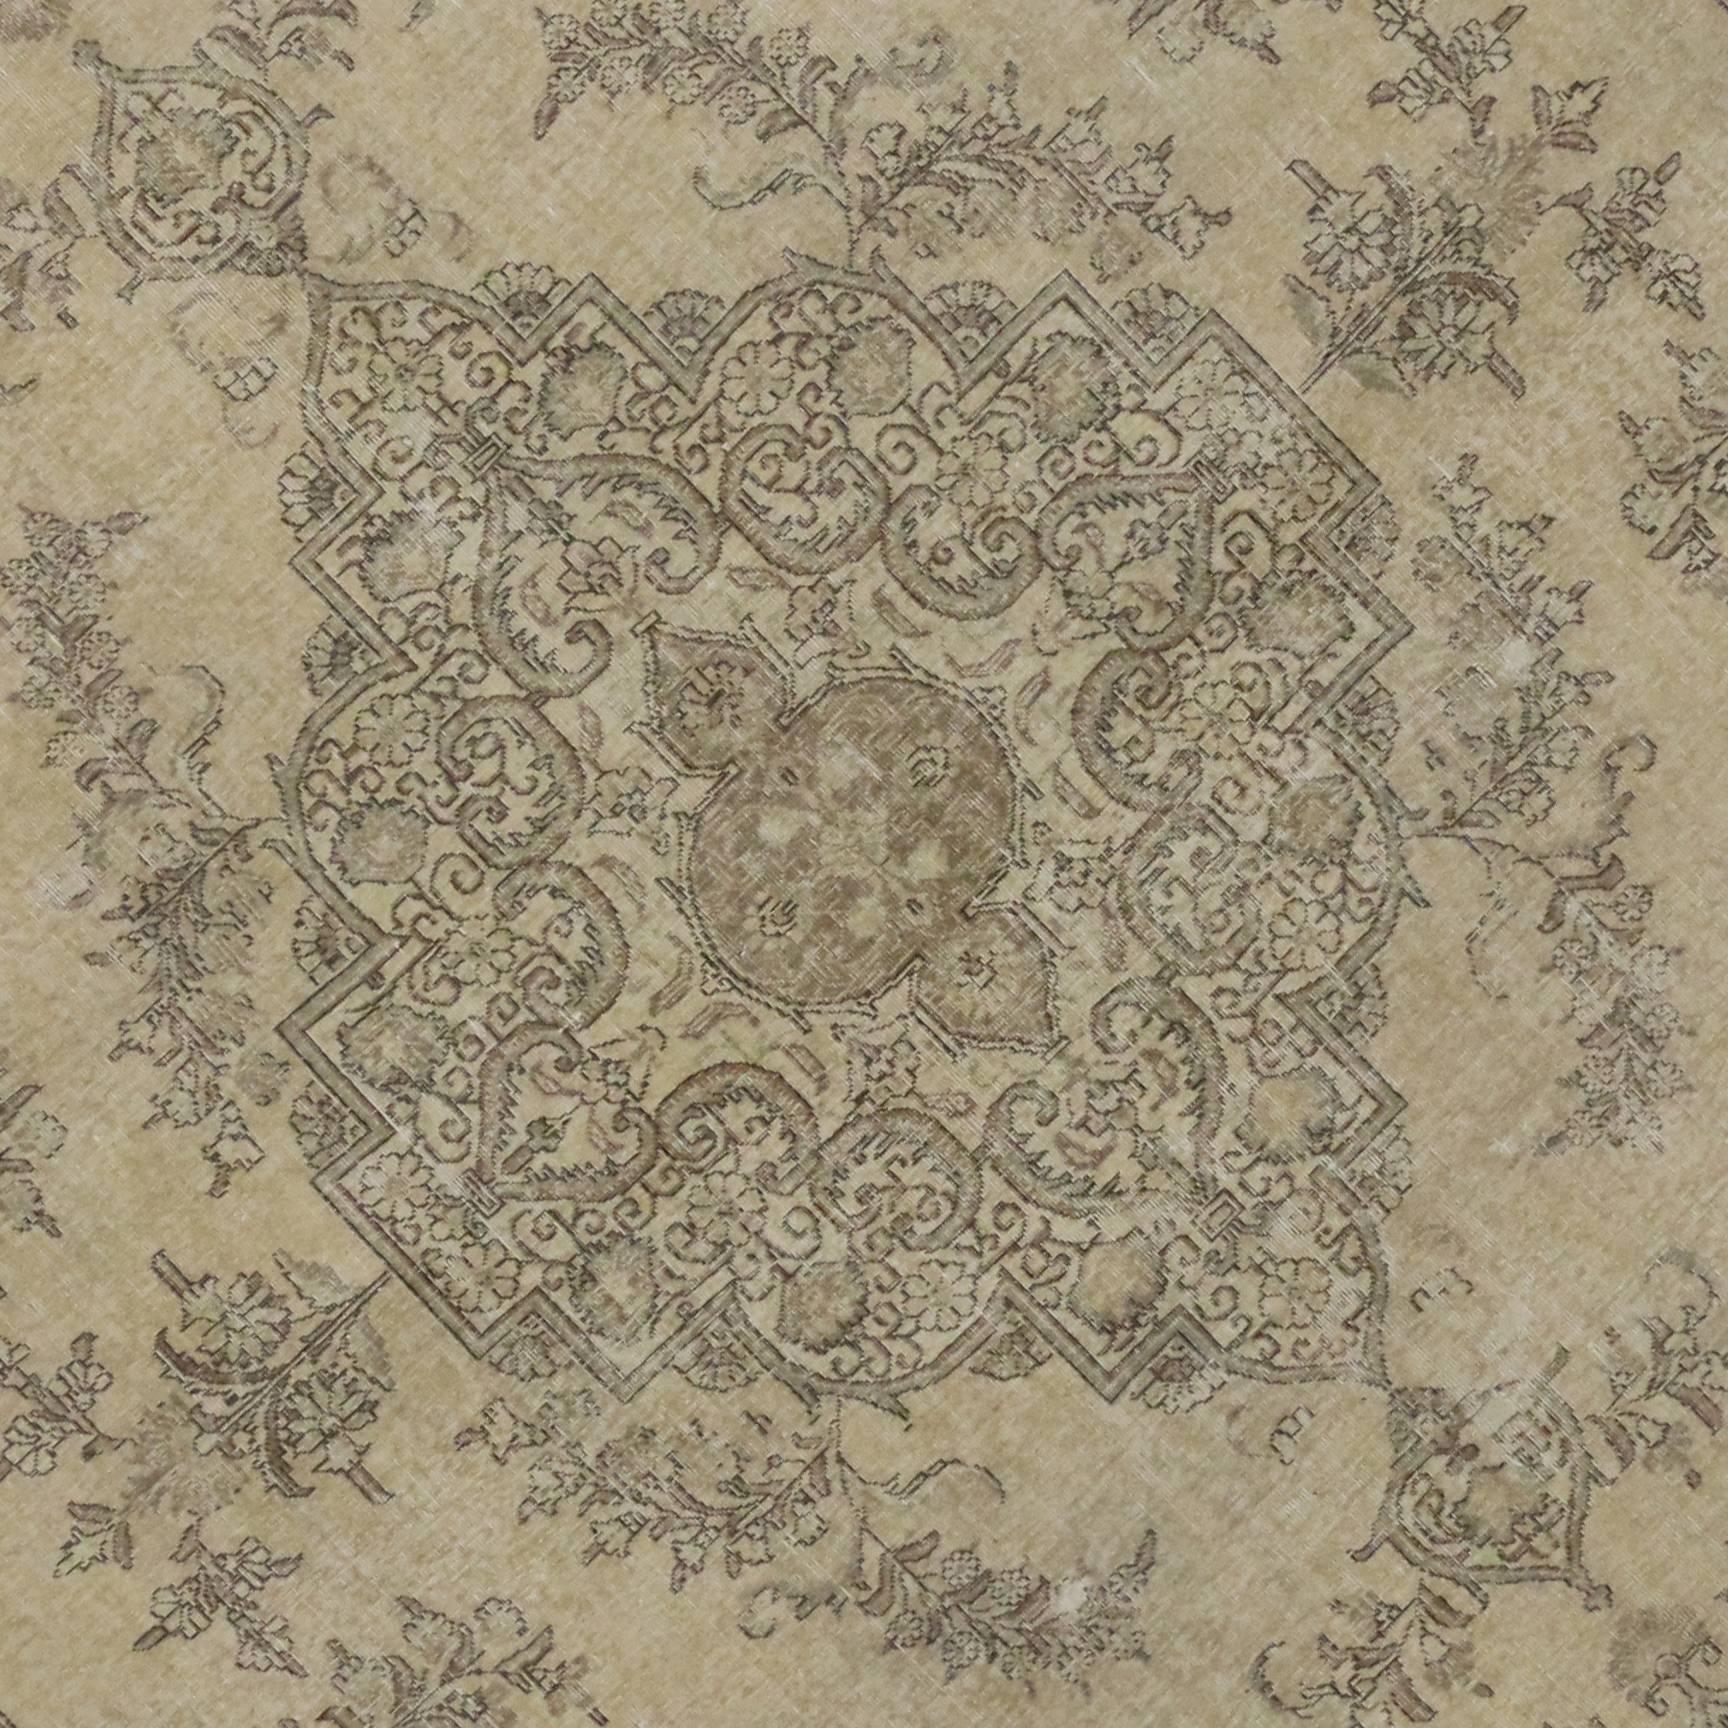 Tabriz Distressed Vintage Persian Rug with Modern Refined French Industrial Style